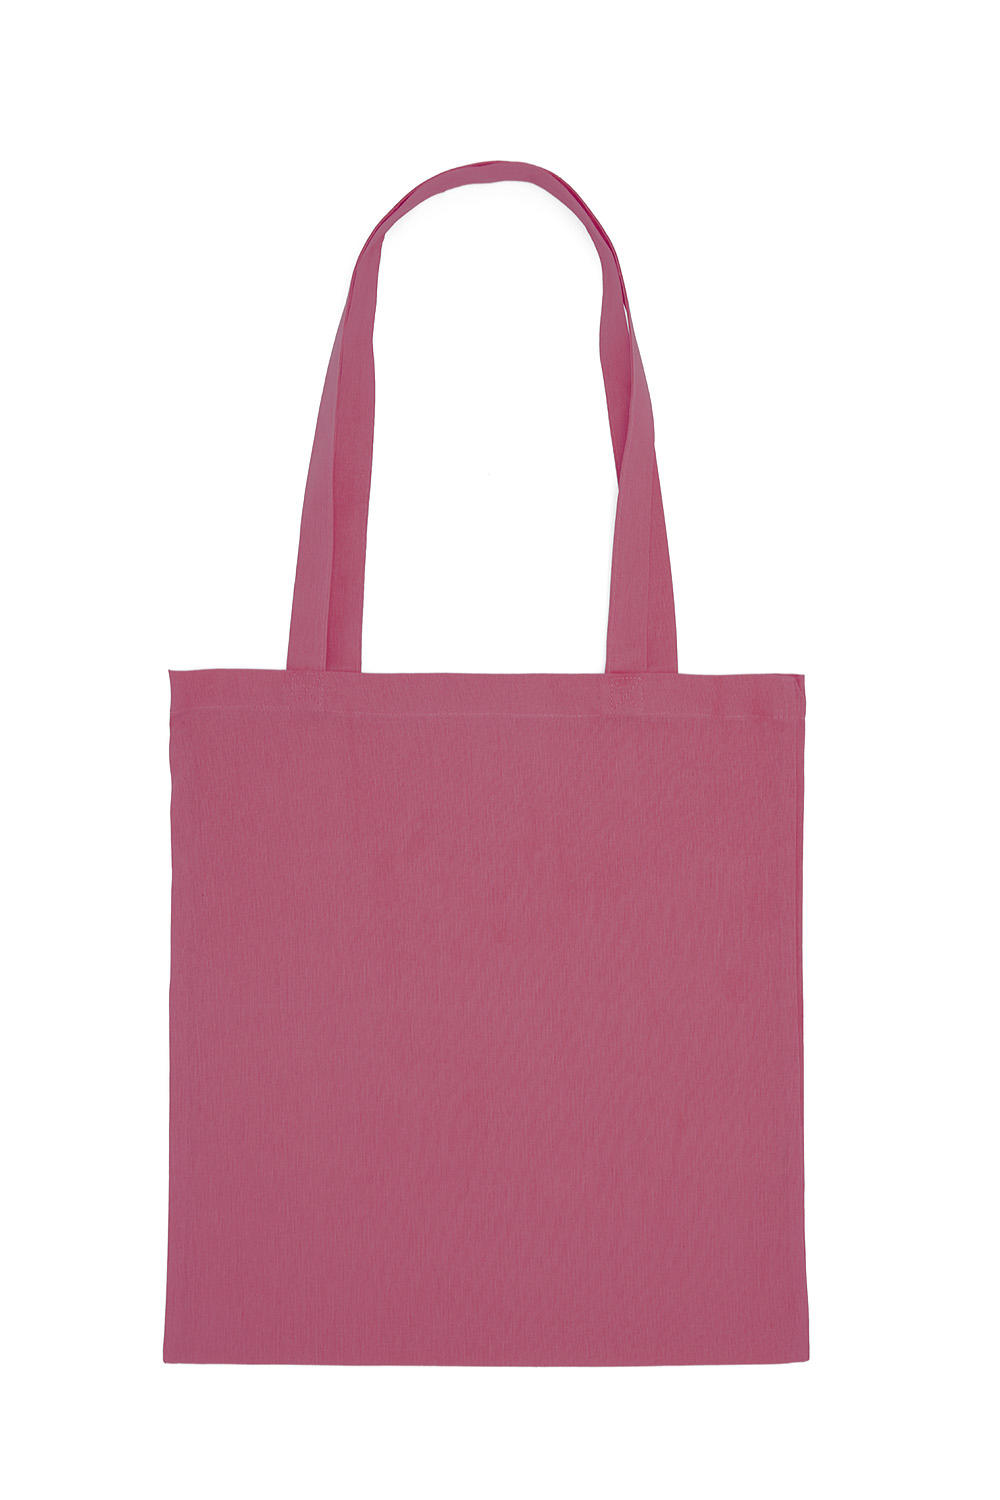  Cotton Bag LH in Farbe Cassis